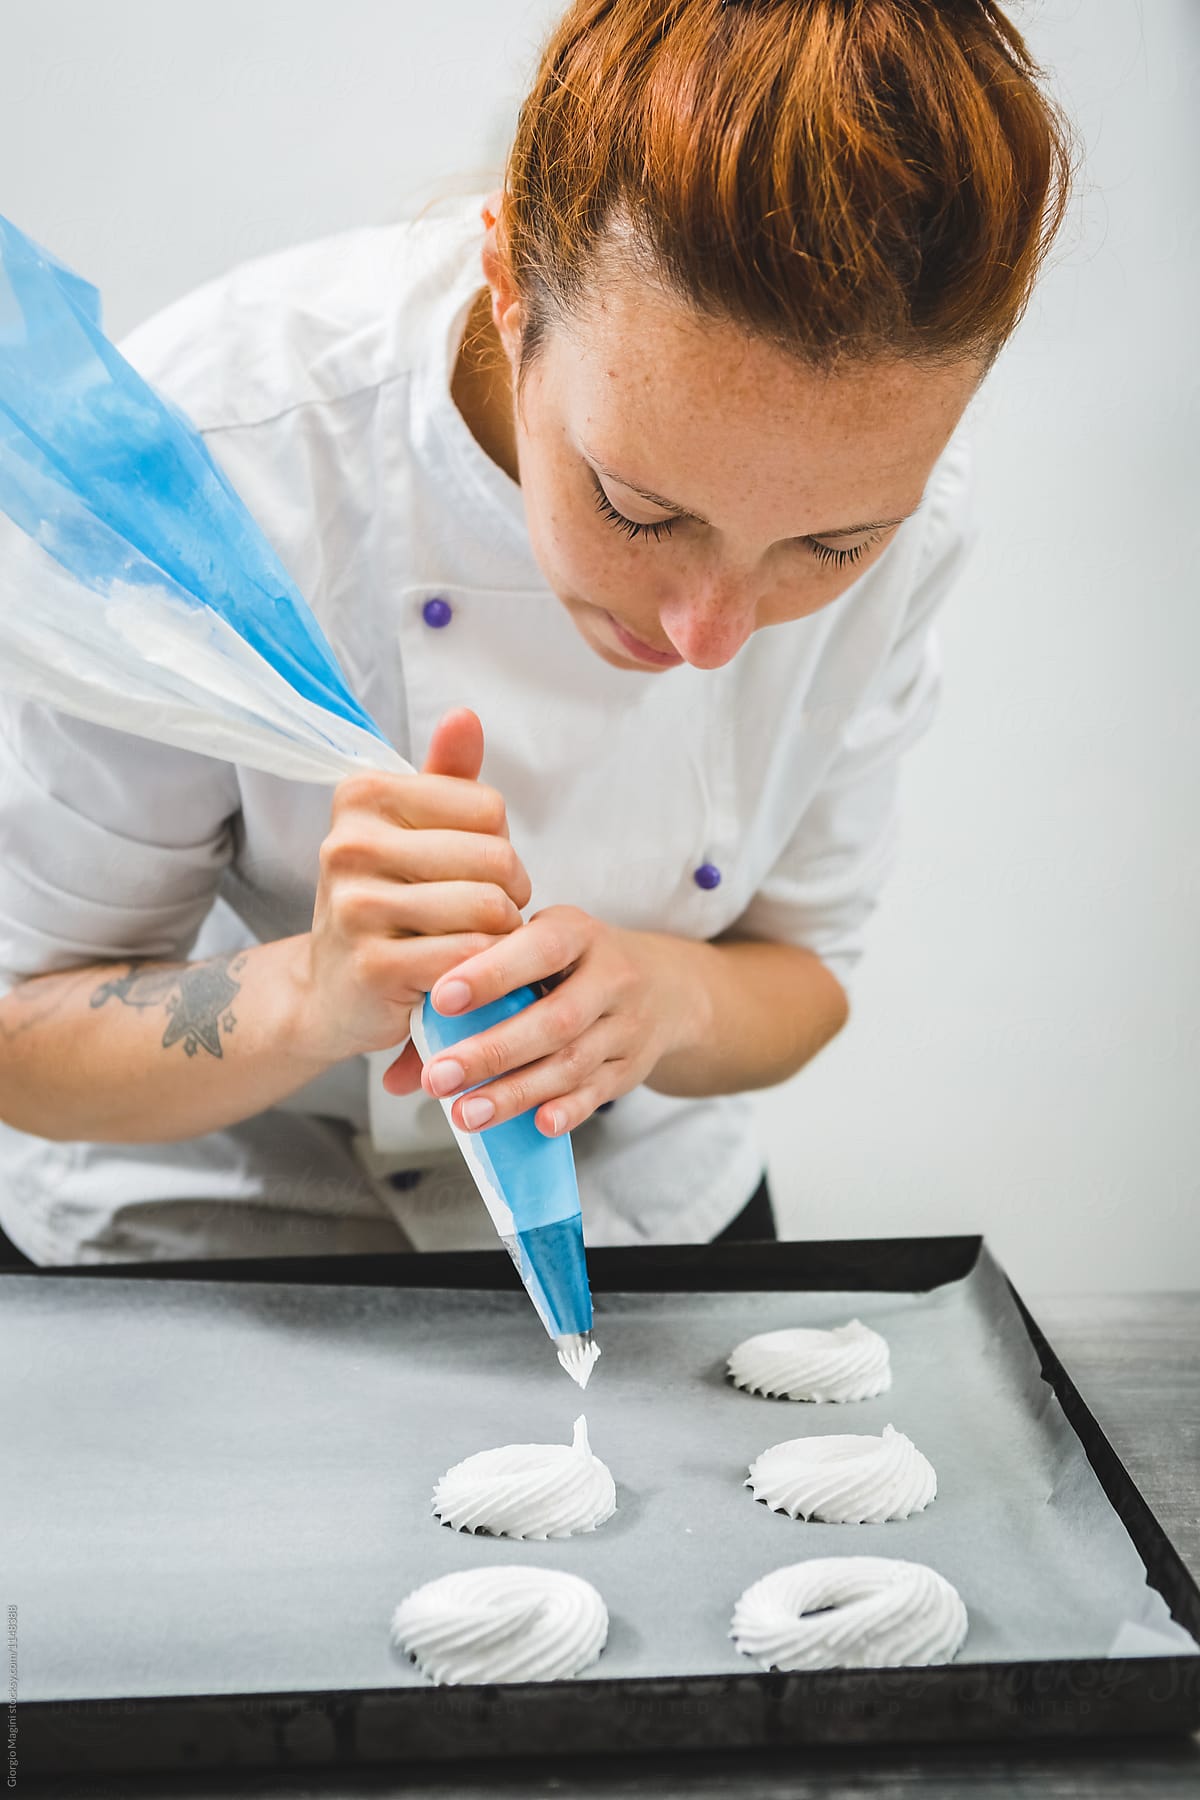 Pastry Chef with a Pastry Bag Preparing Meringues to Bake